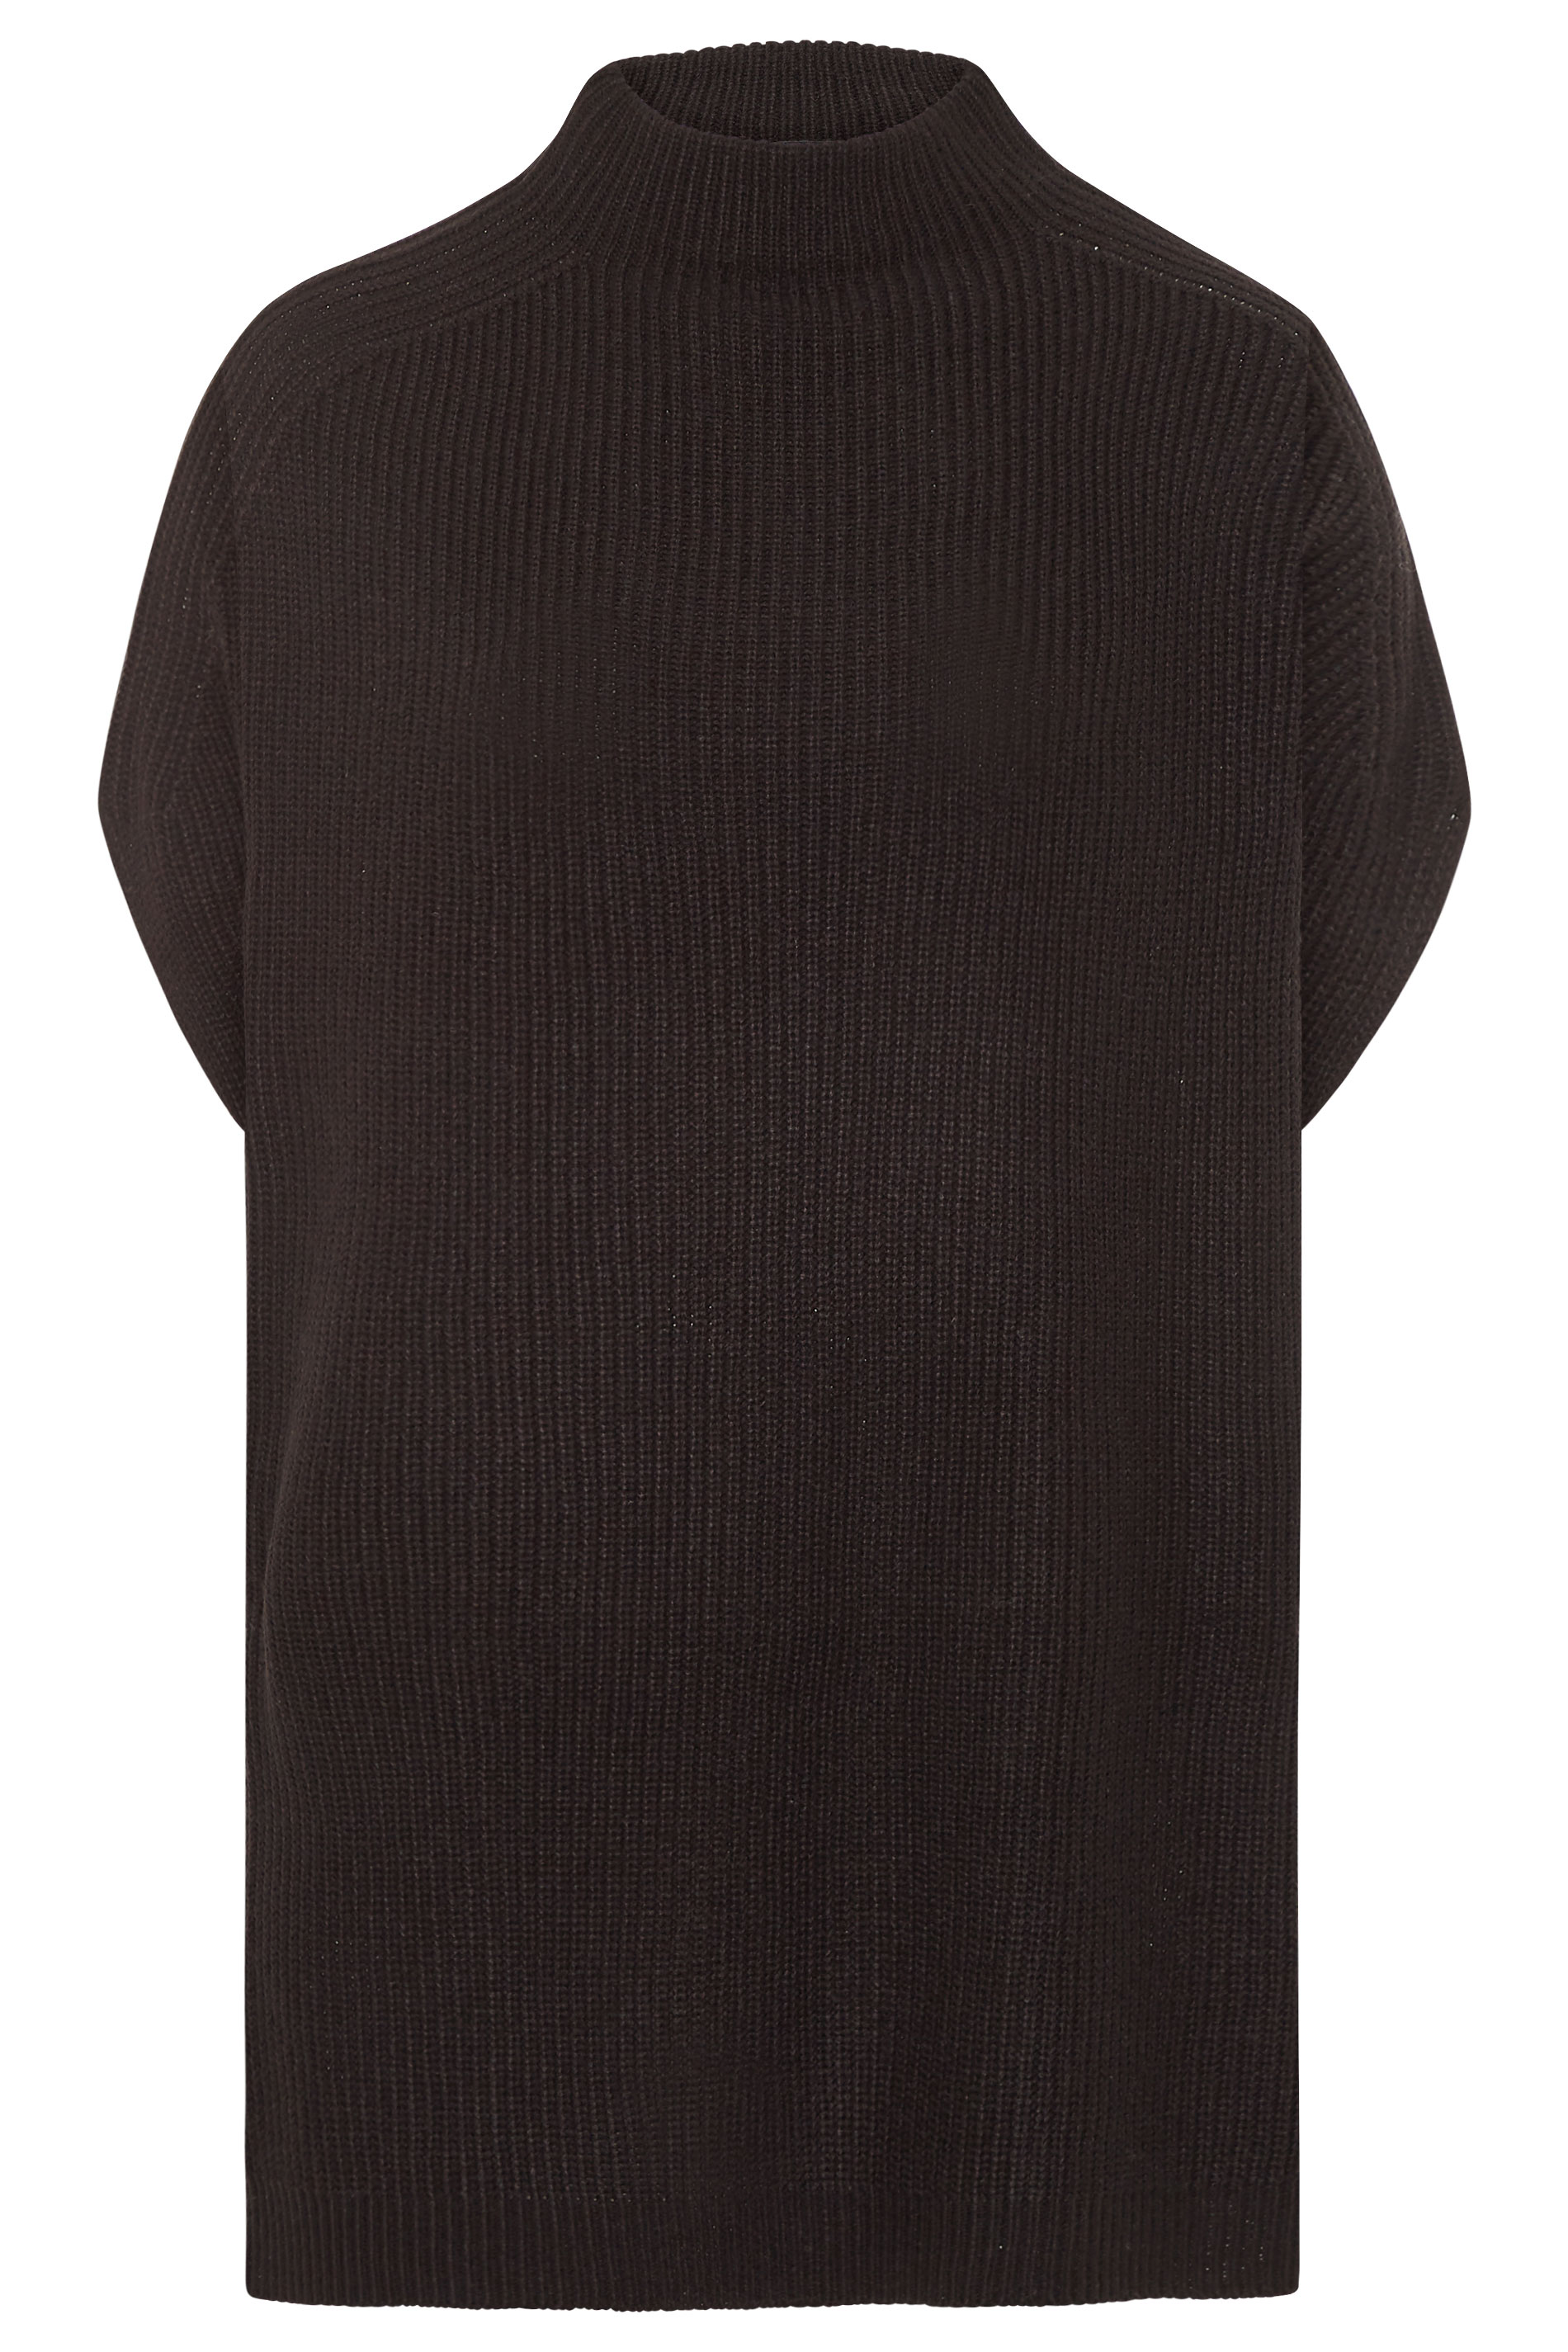 Black Longline Sleeveless Knitted Jumper | Yours Clothing